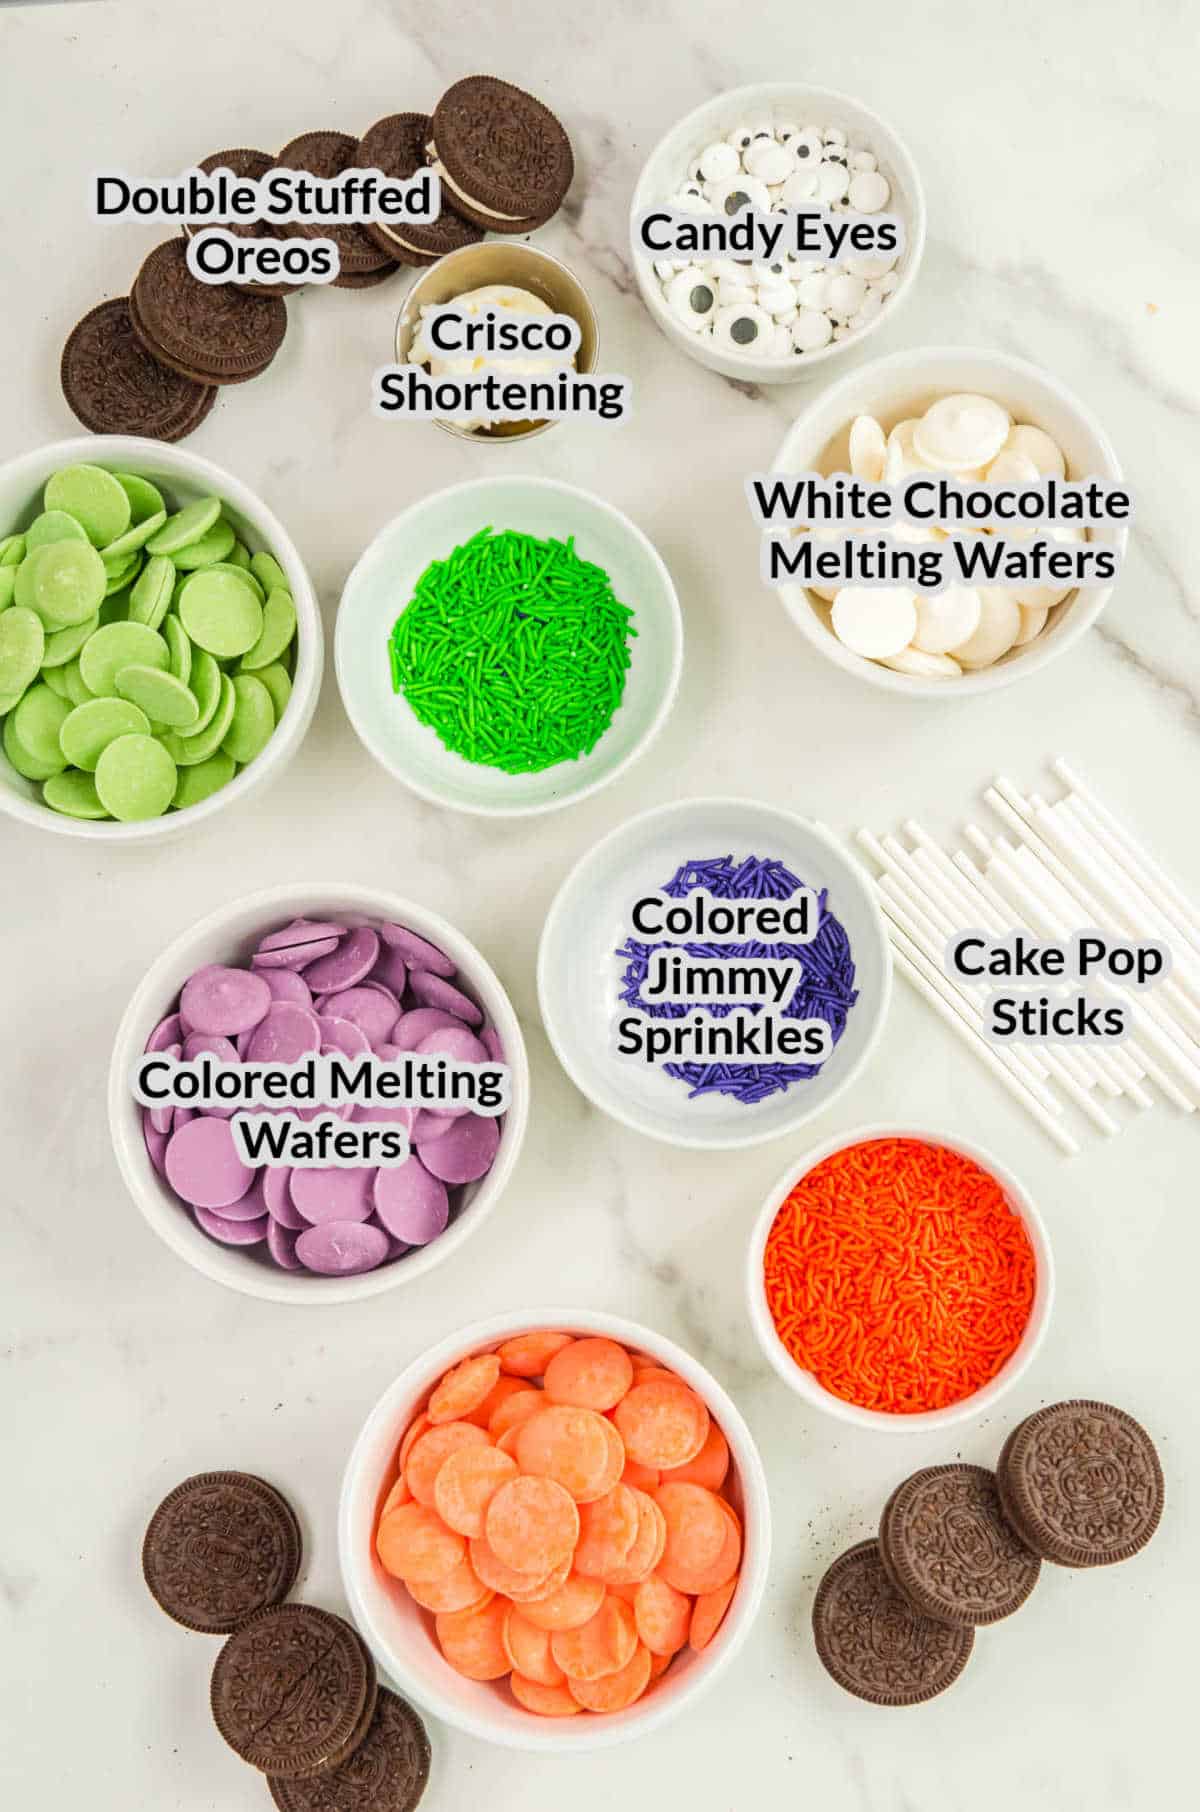 Overhead Image of the Monster Oreo Pops Ingredients